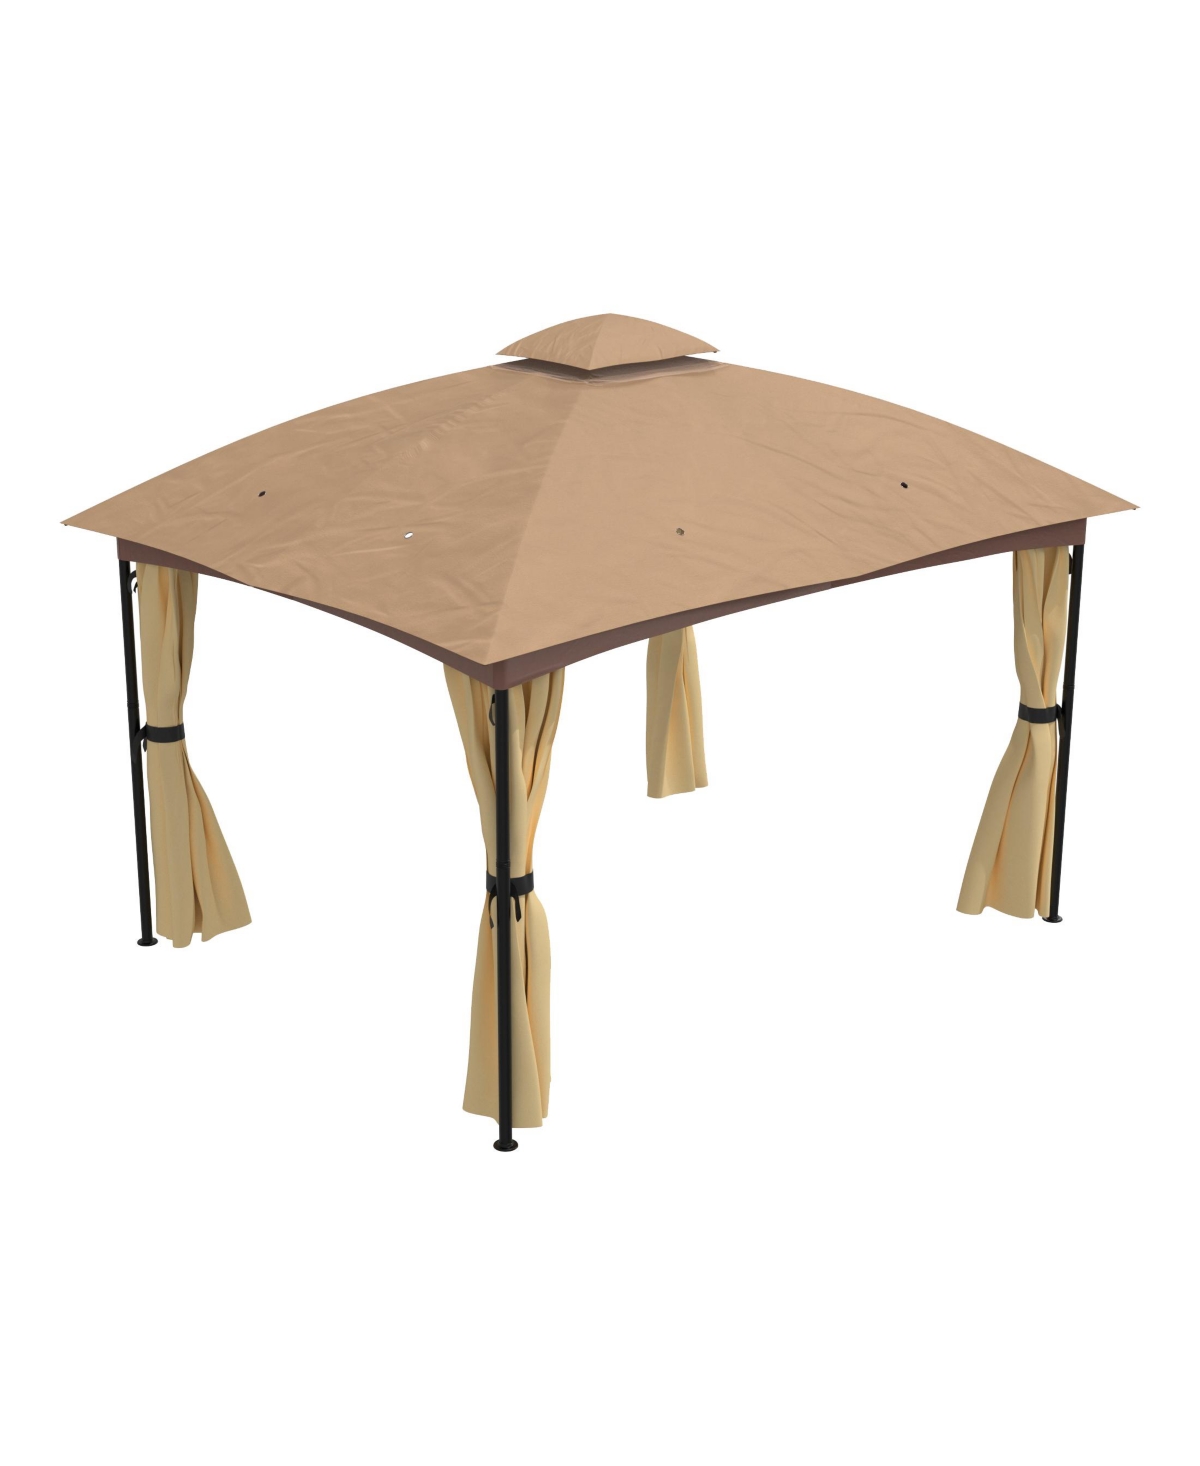 10 x 12" ft Soft Top Outdoor Patio Gazebo Tent Canopy with Included Curtains Ventilated Double Roof, Beige - Beige